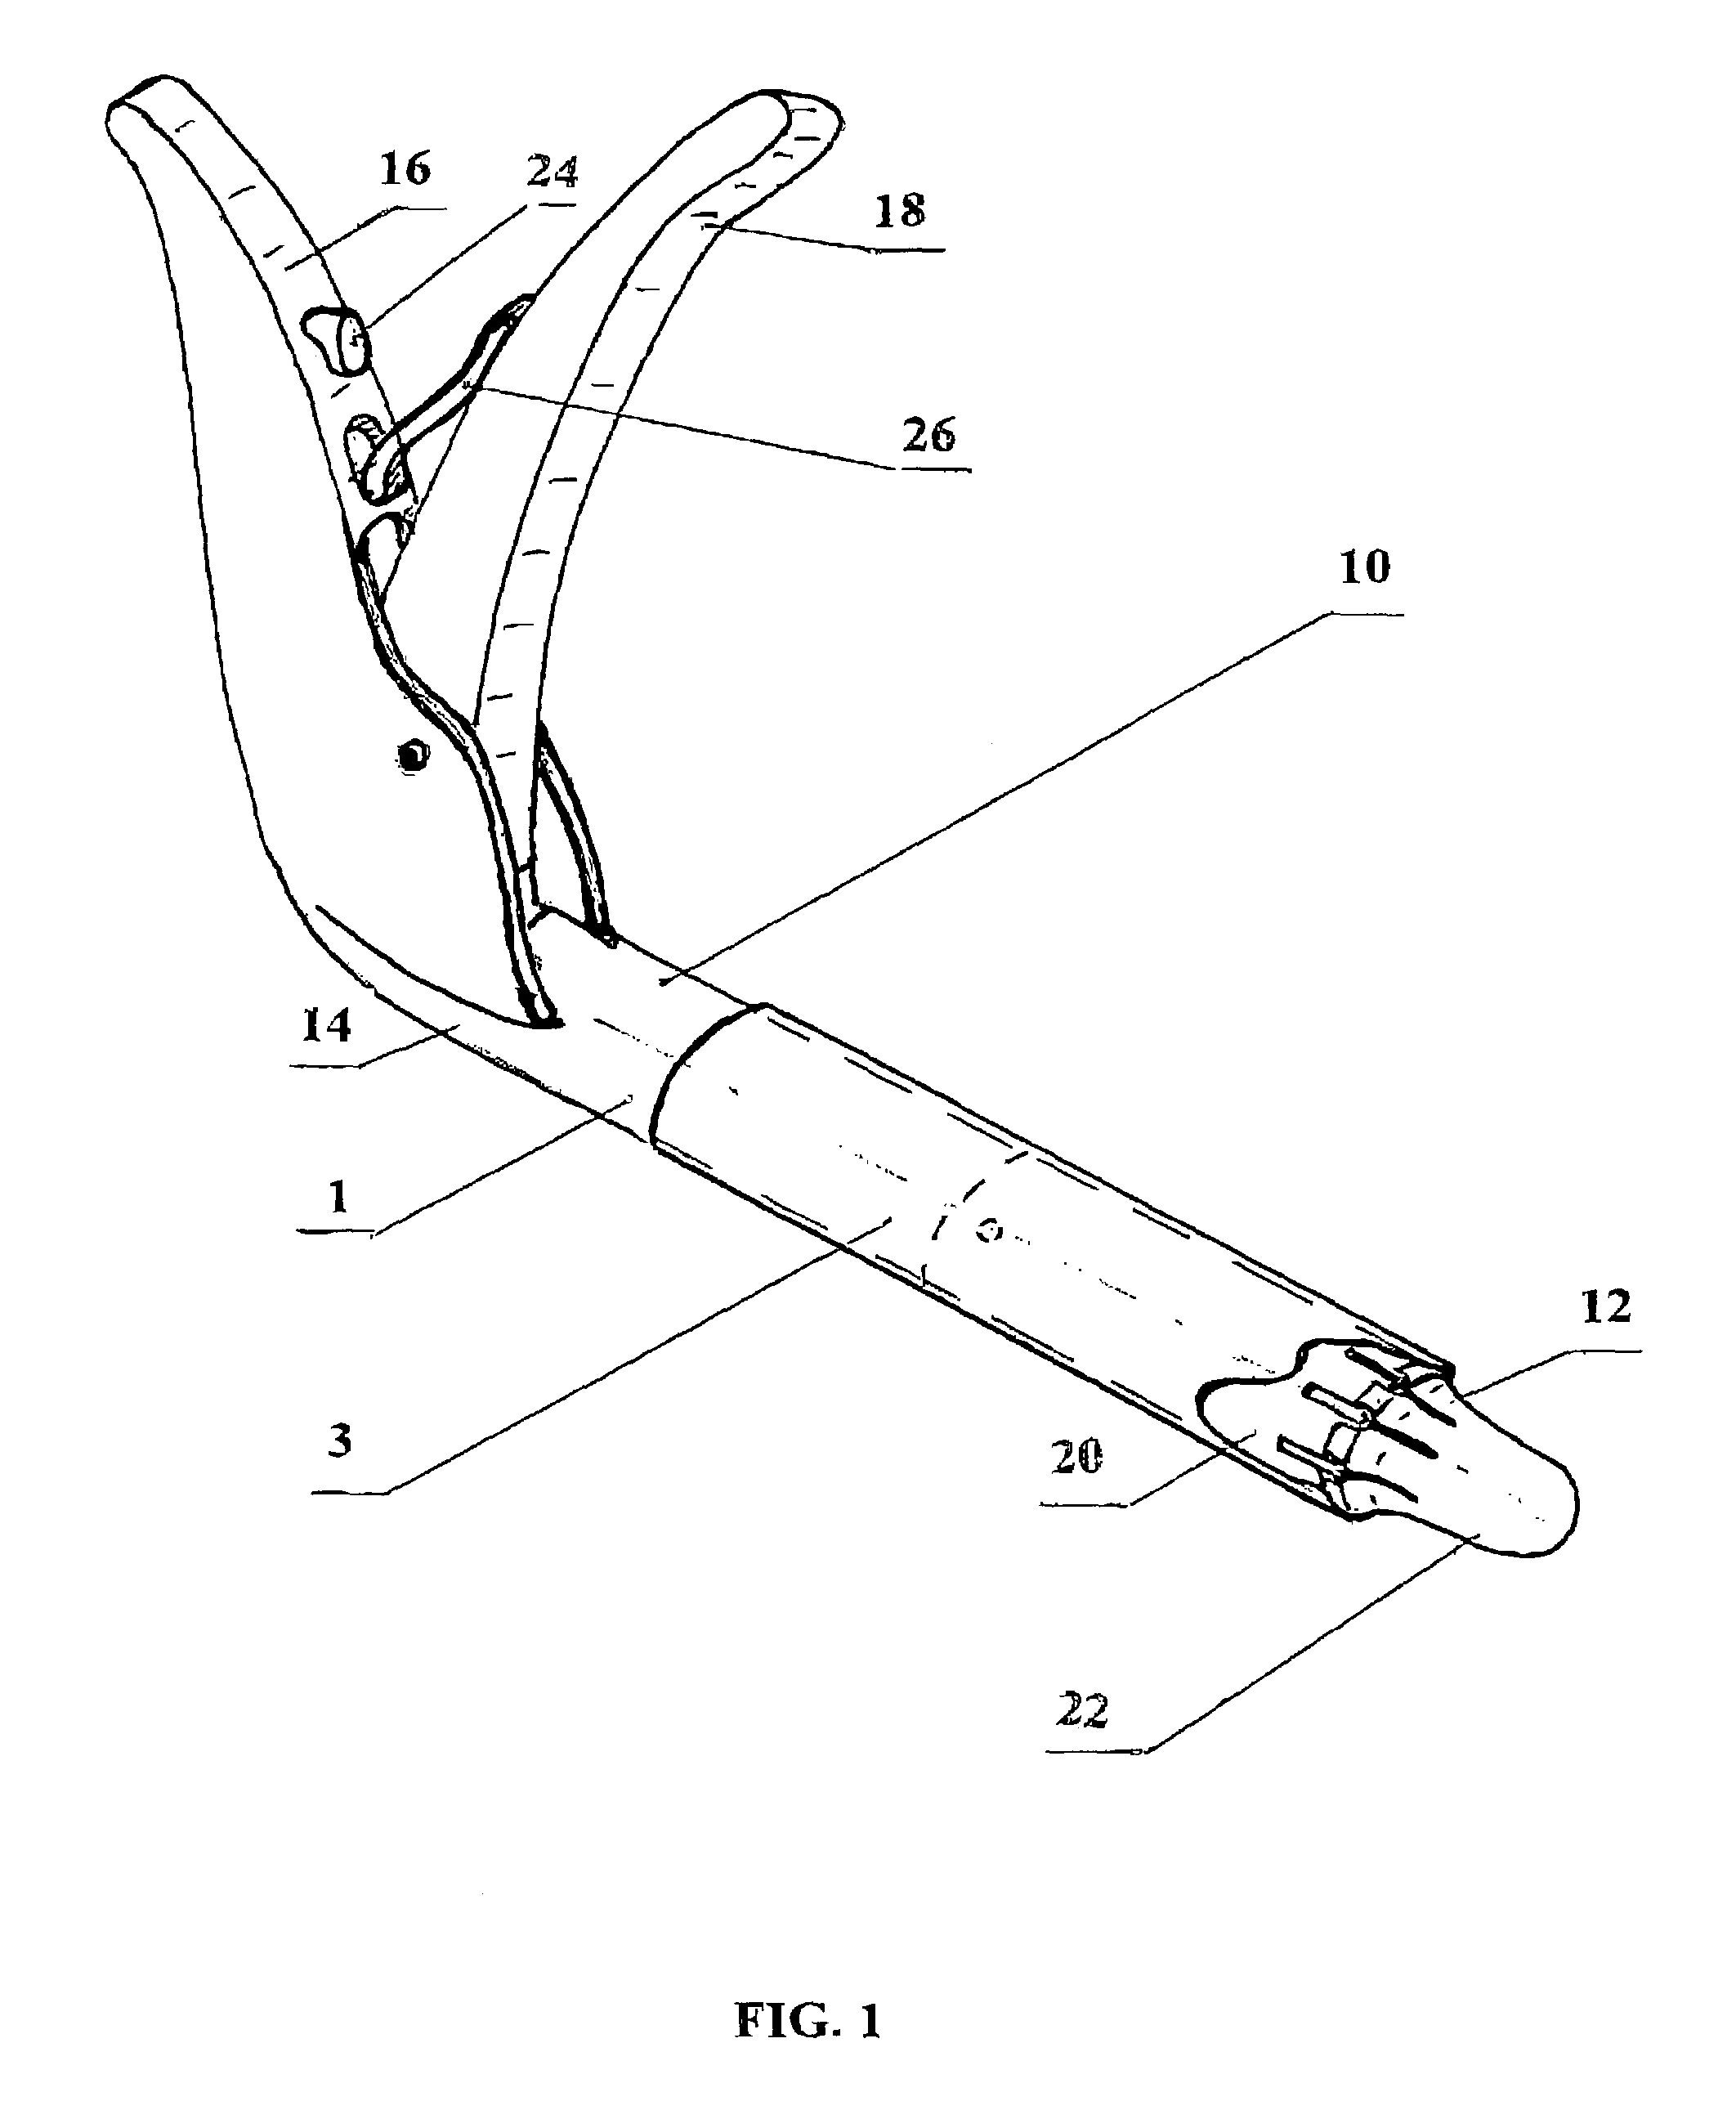 Method and apparatus for intraluminal fixation of intravascular devices